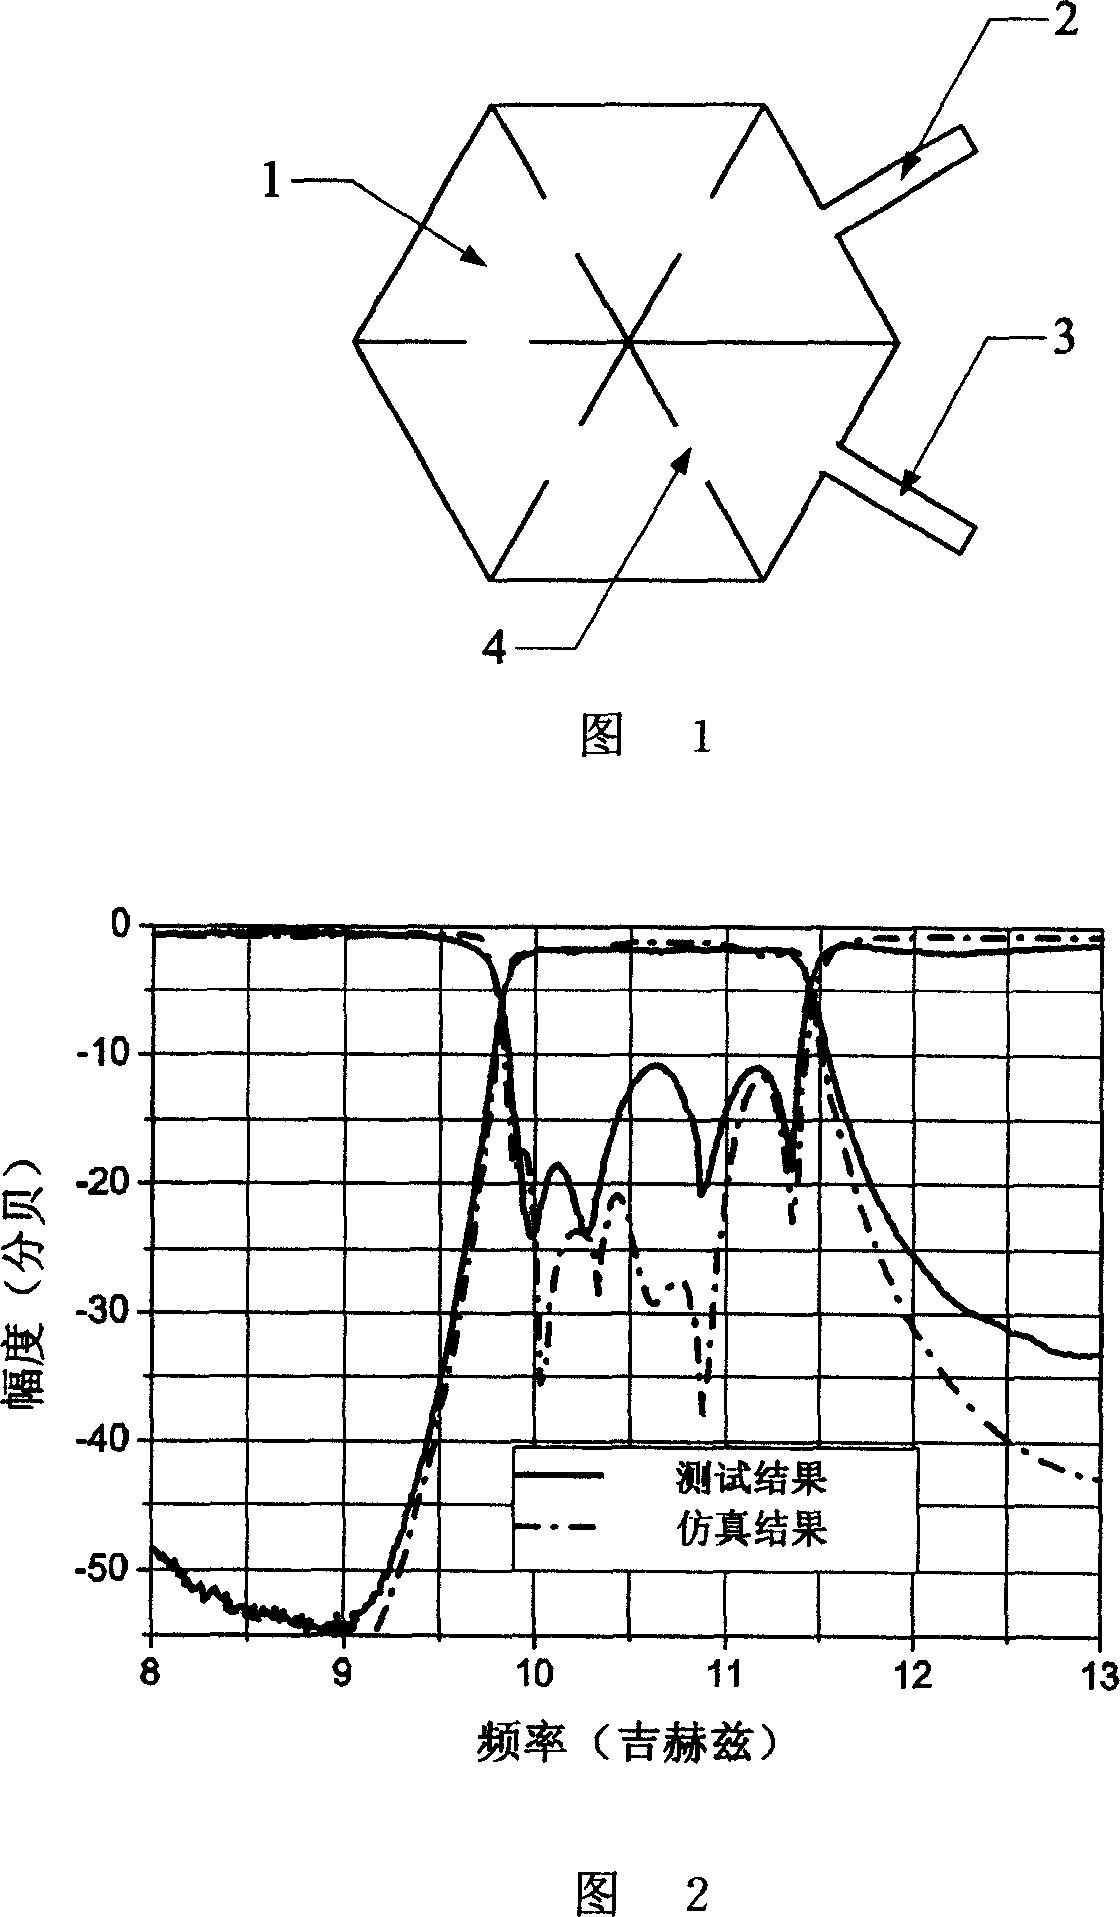 A filter of direct coupling triangle substrate integral waveguide cavity